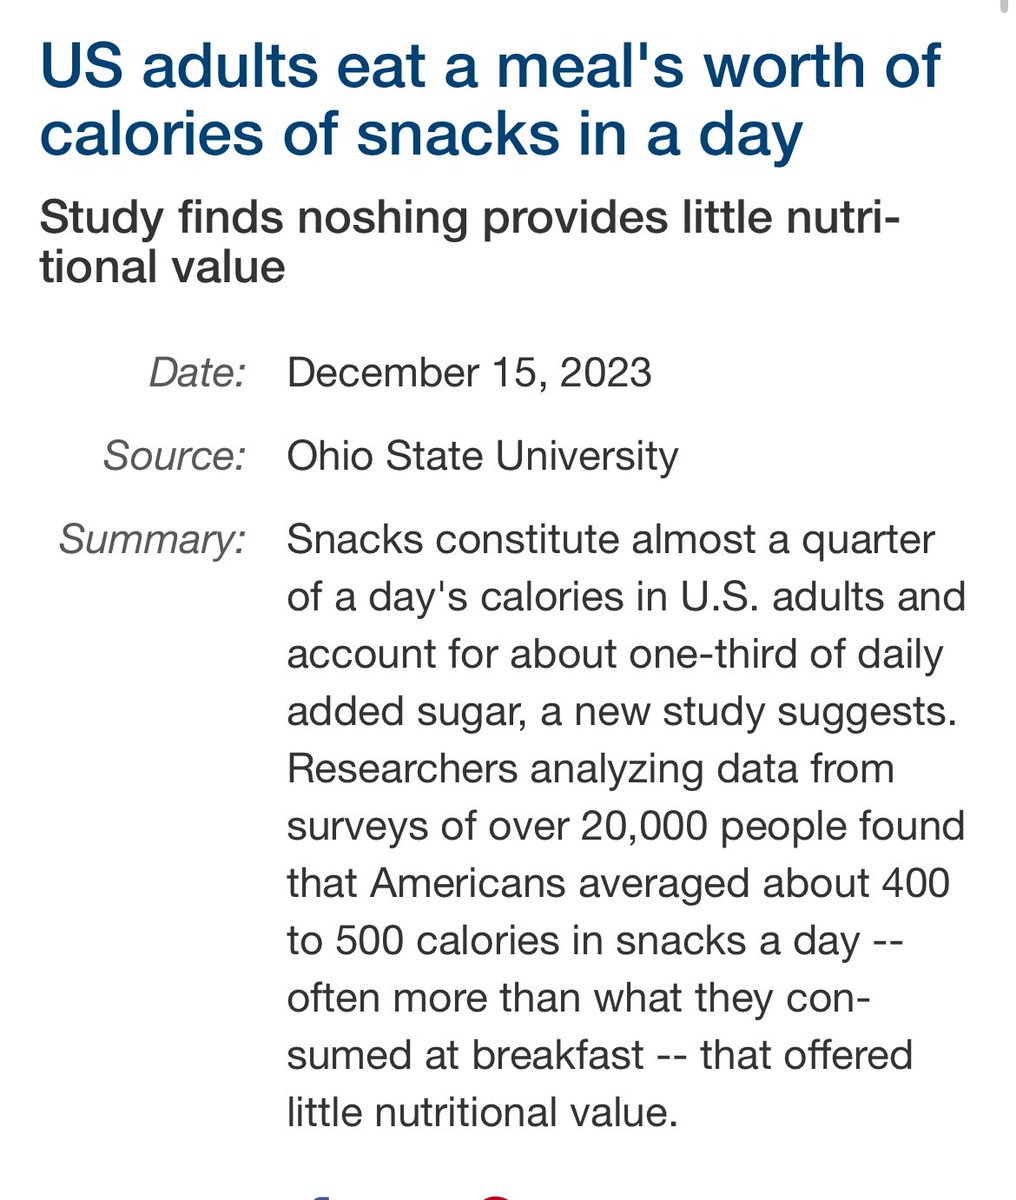 US adults consume a meal’s worth of calories from snacks daily, averaging 400-500 calories with little nutritional value. 

Snacks account for nearly a quarter of daily calories and one-third of added sugar intake. 

#HealthStudy #Snacking

sciencedaily.com/releases/2023/…